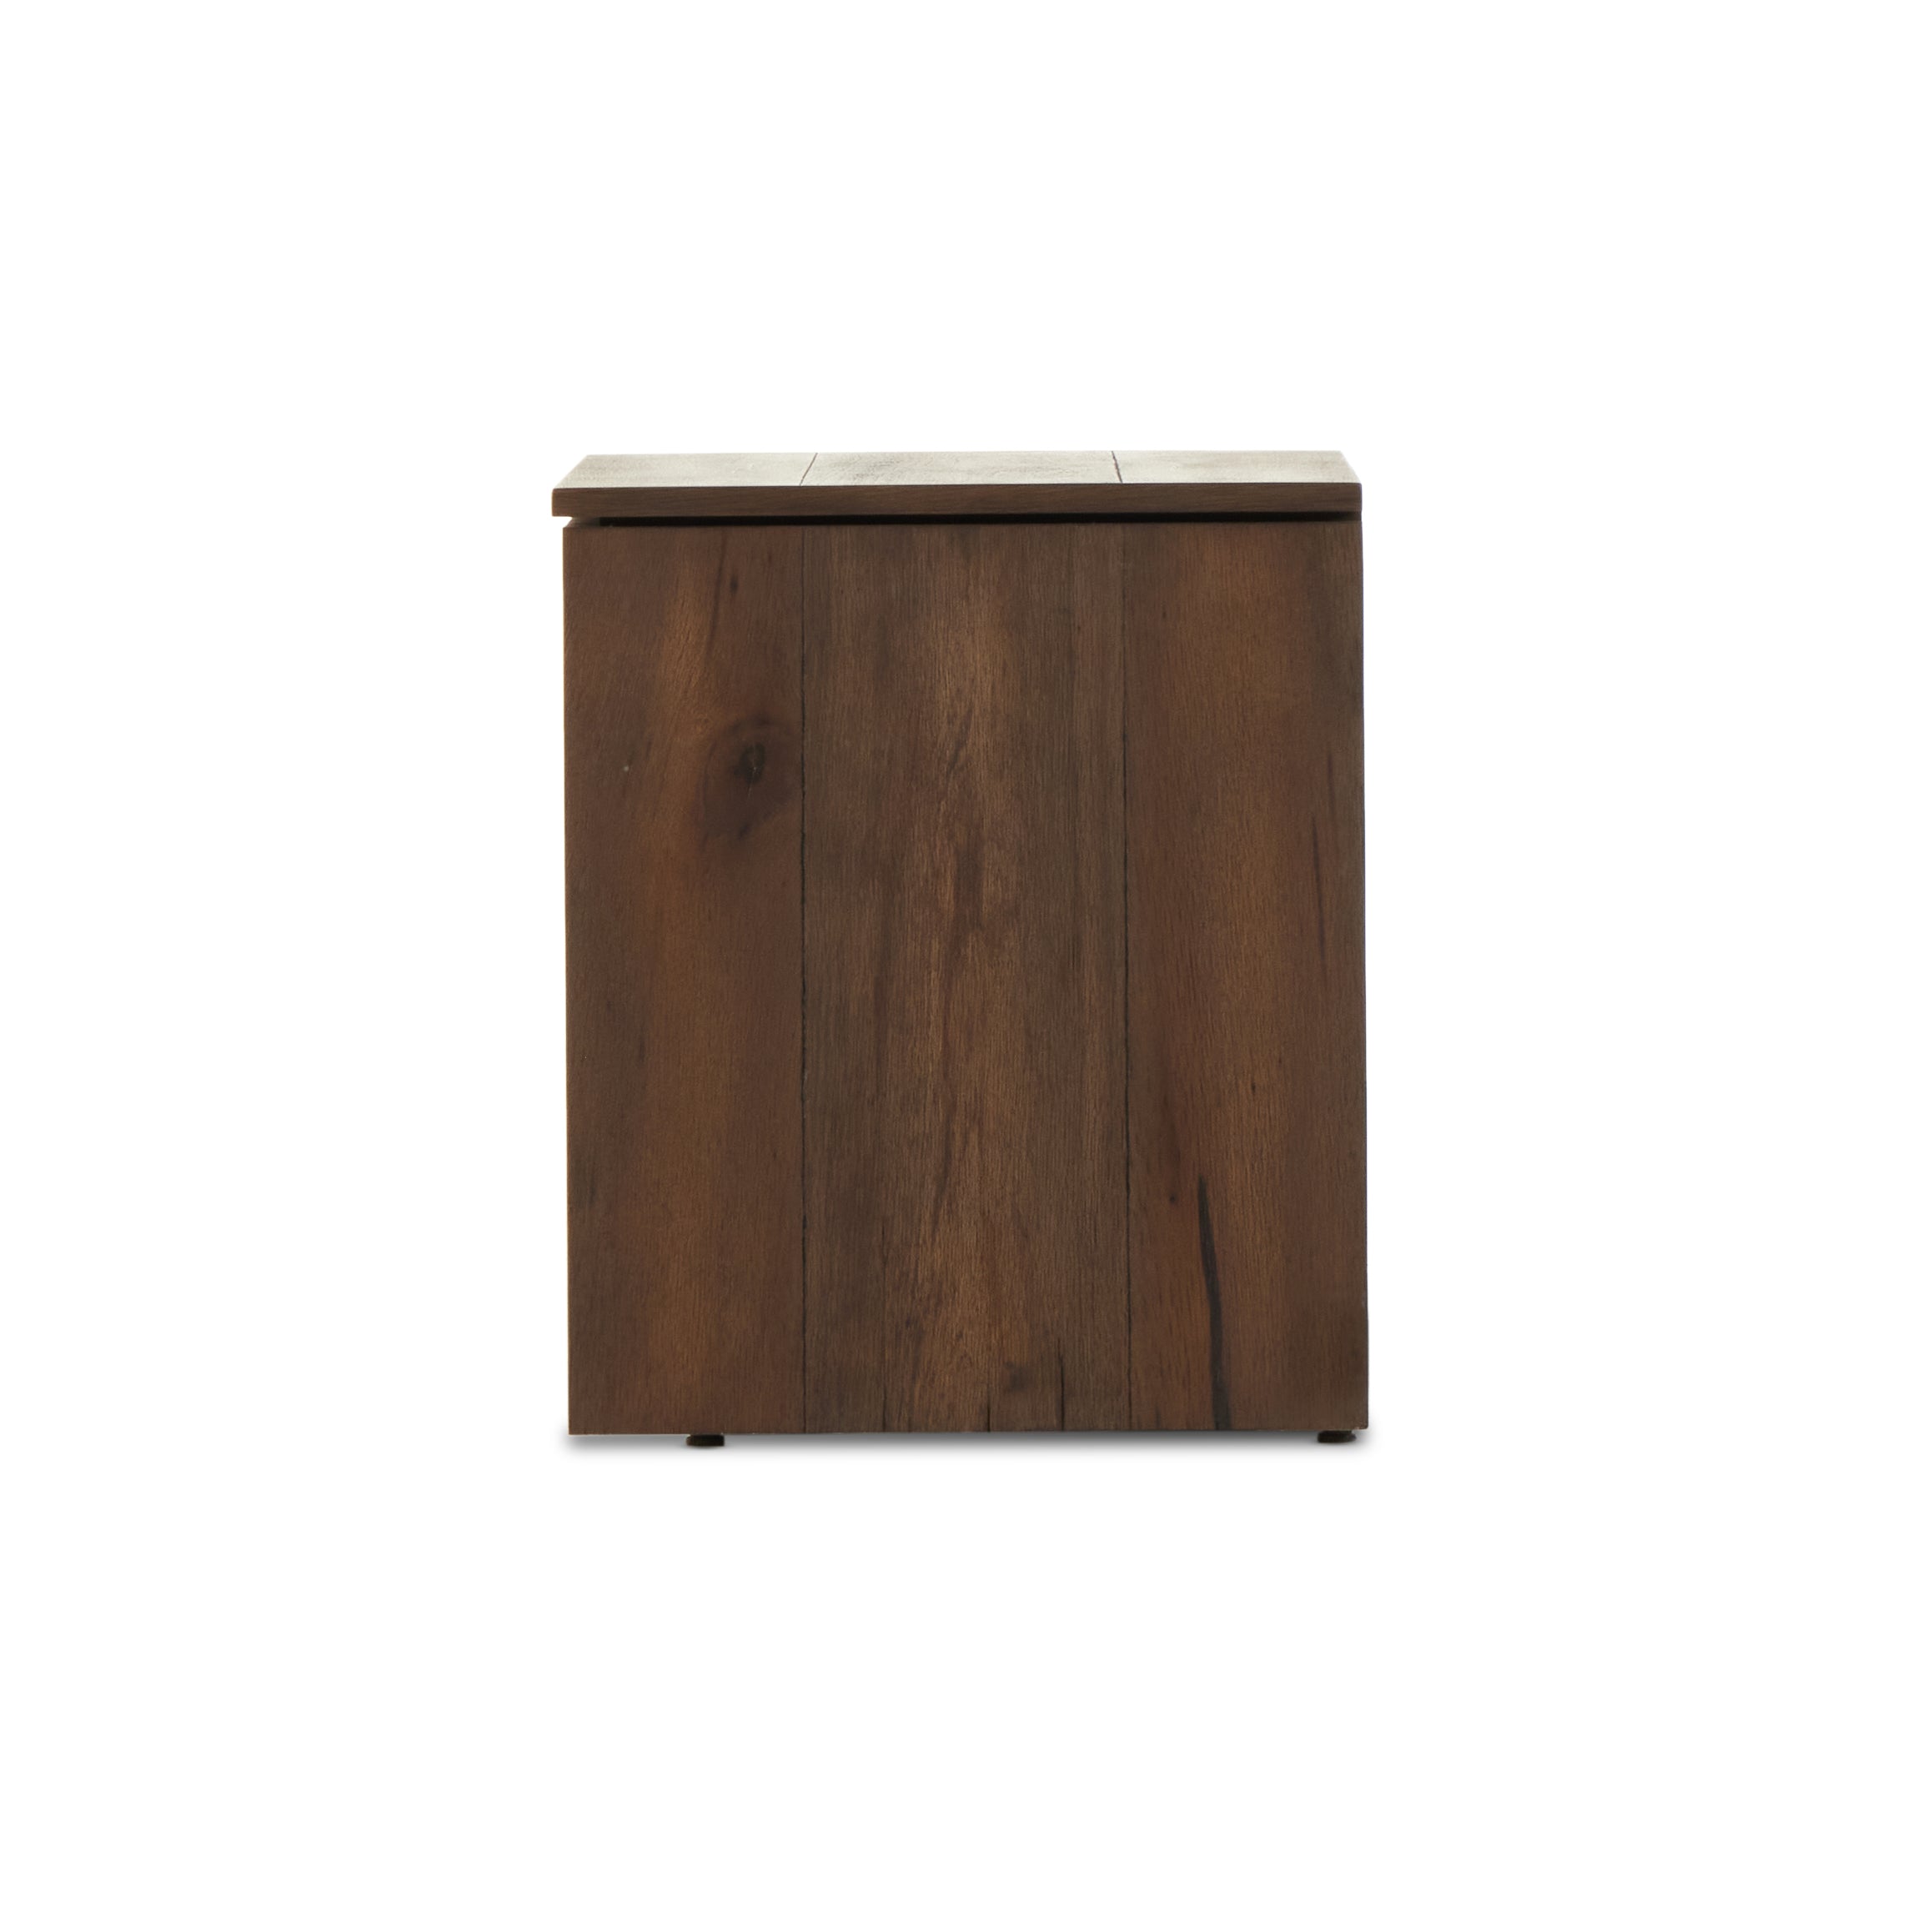 Structured lines define the sleek, modern shape of this large nightstand. Dark oak finishing showcases heavy graining and detail. Amethyst Home provides interior design, new construction, custom furniture, and area rugs in the Los Angeles metro area.